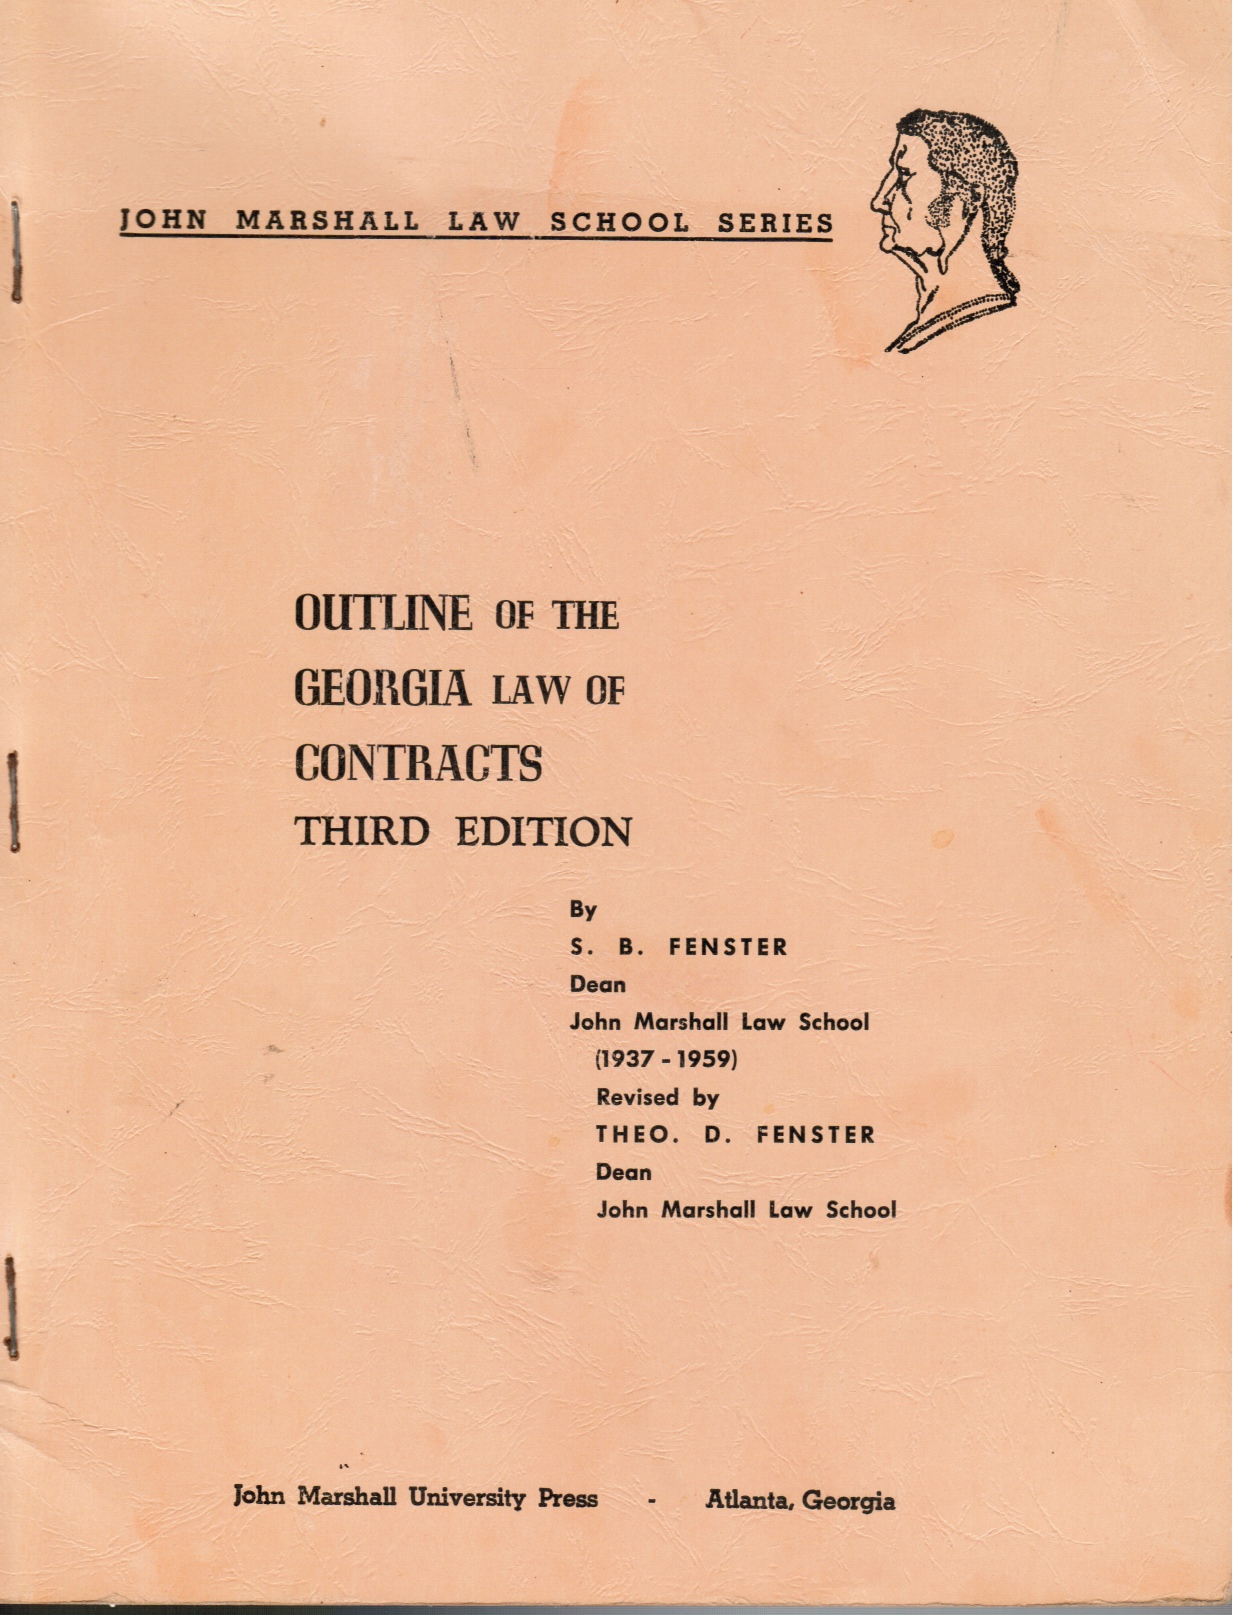 FENSTER, S. B; THEO D. FENSTER (REVISED) - Outline of the Georgia Law of Contracts